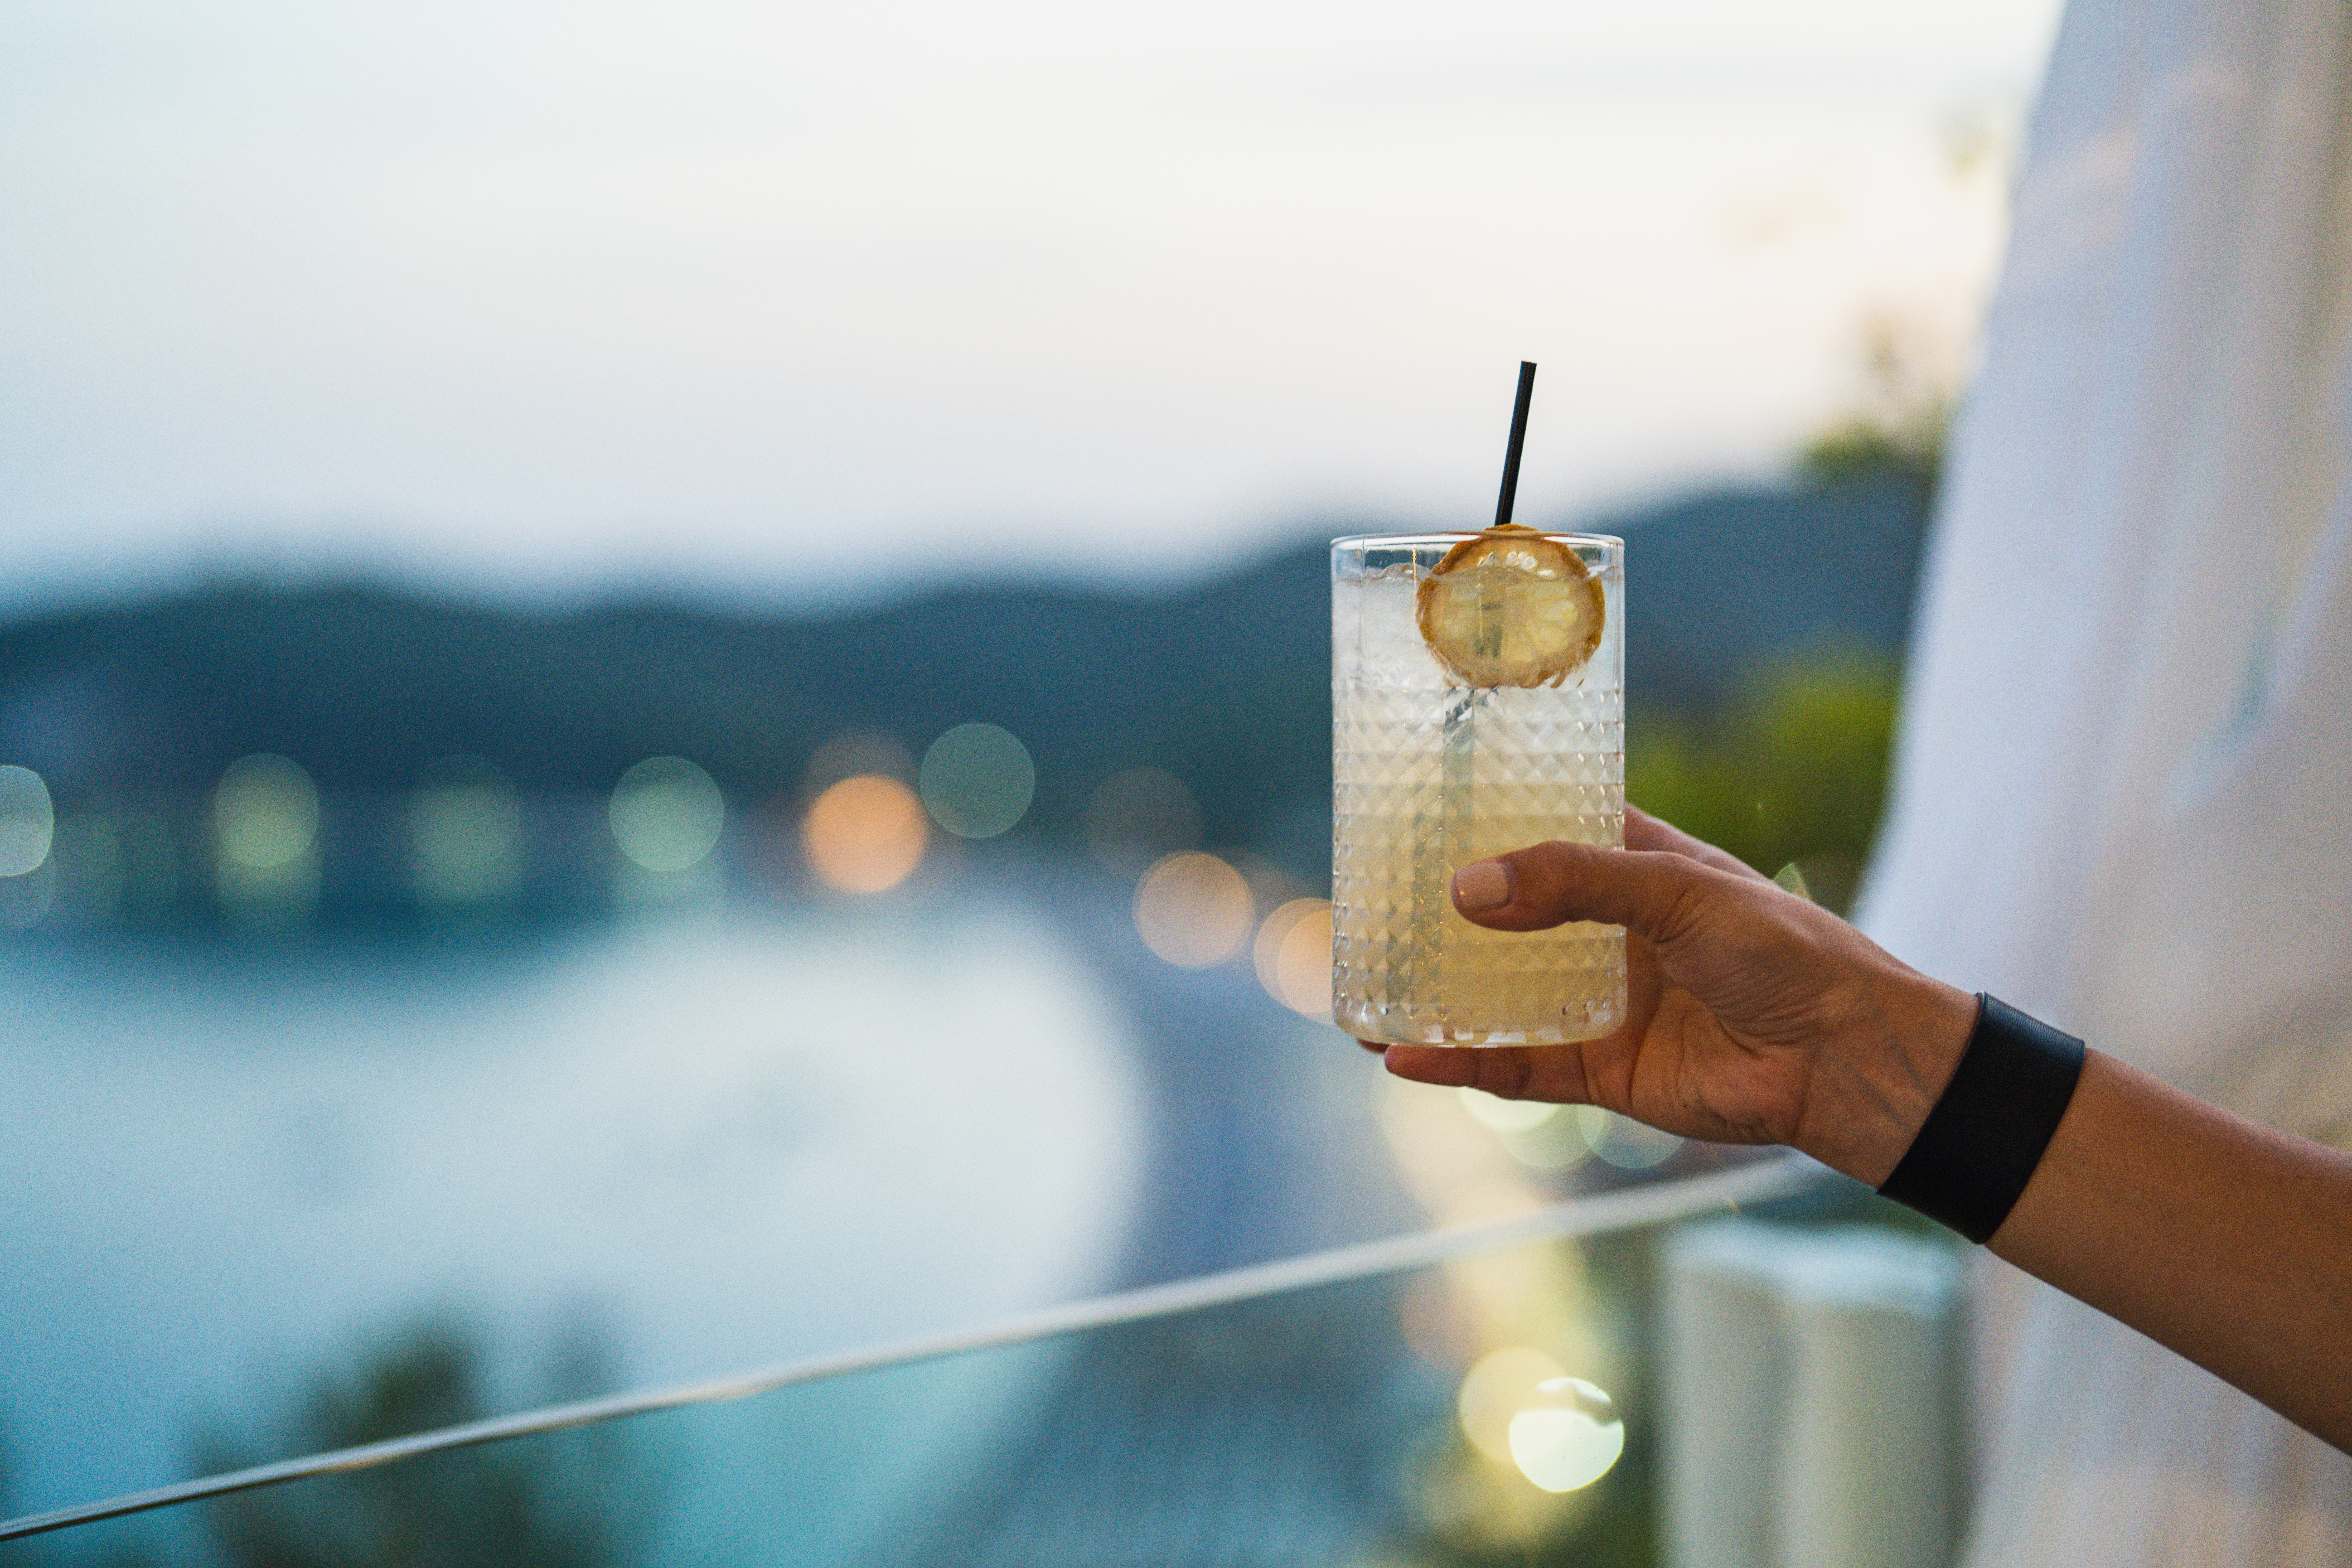 A hand with painted nails and a banded bracelet holds a cocktail in a textured glass with a straw and citrus slice against a lake and mountain backdrop.